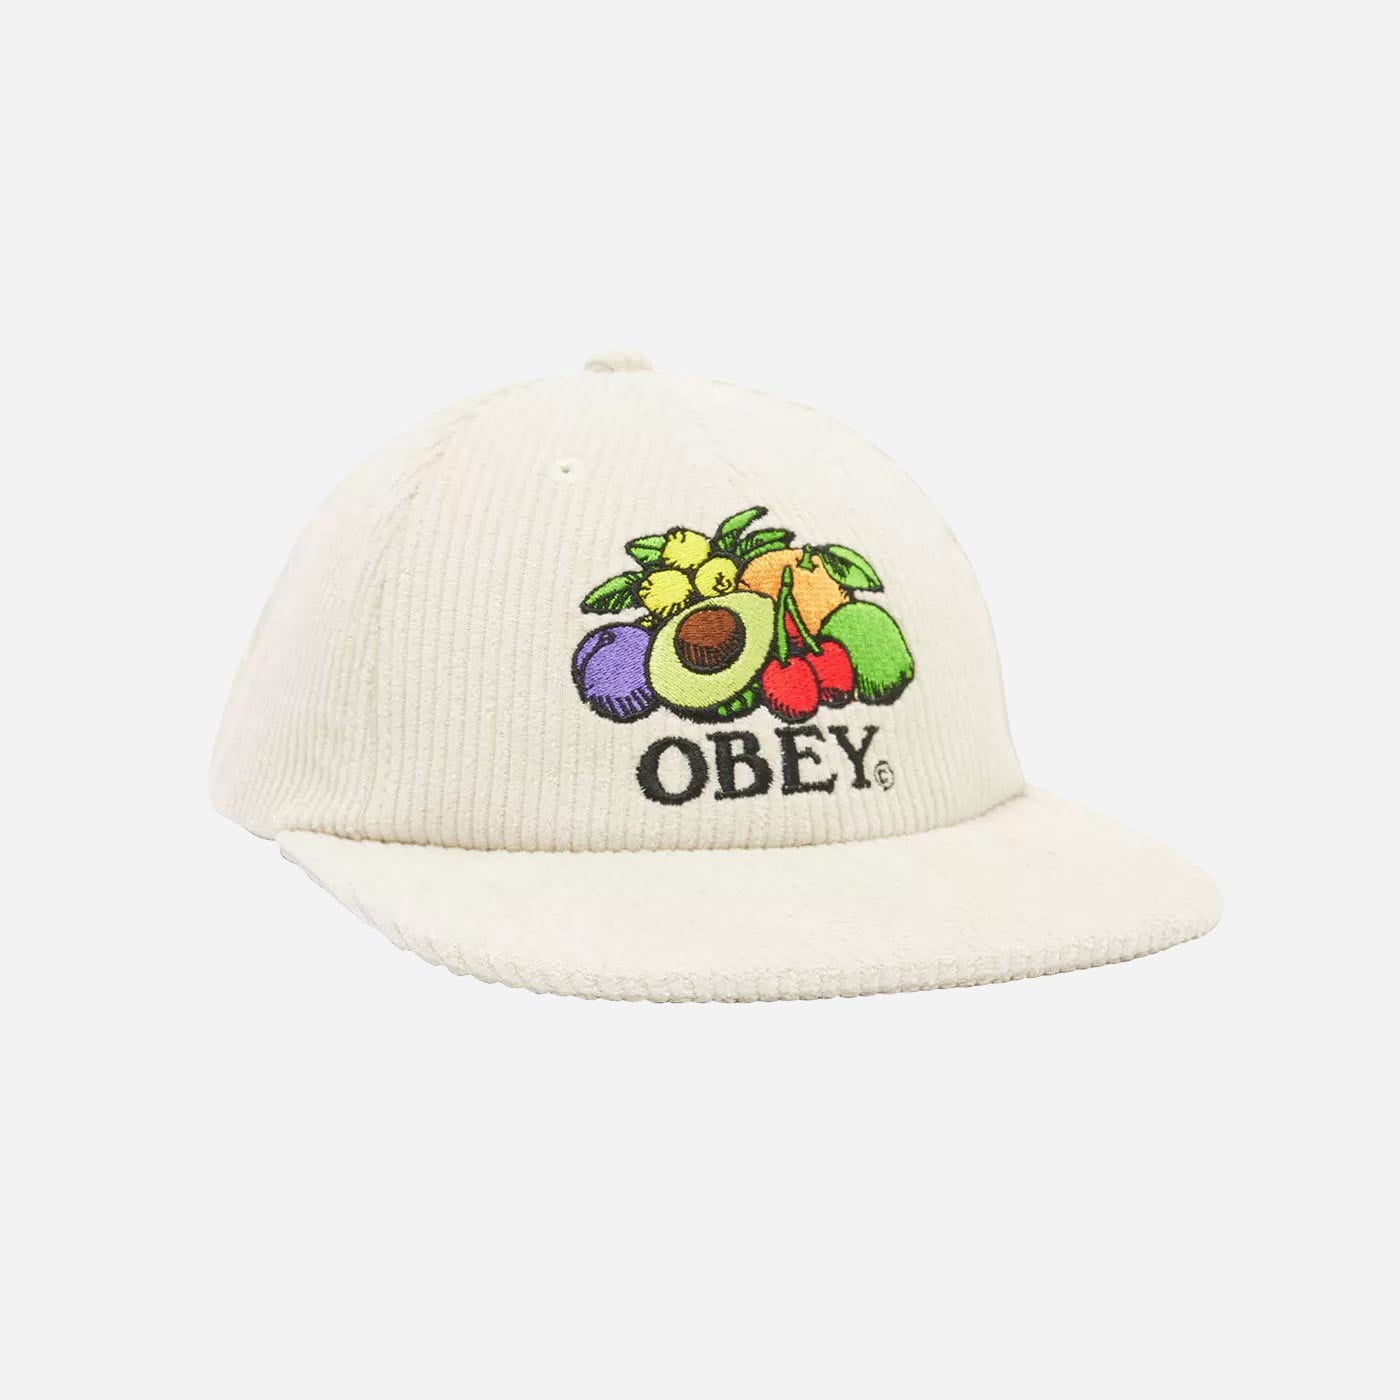 Obey Fruits 6 Panel Snapback Cap - Unbleached